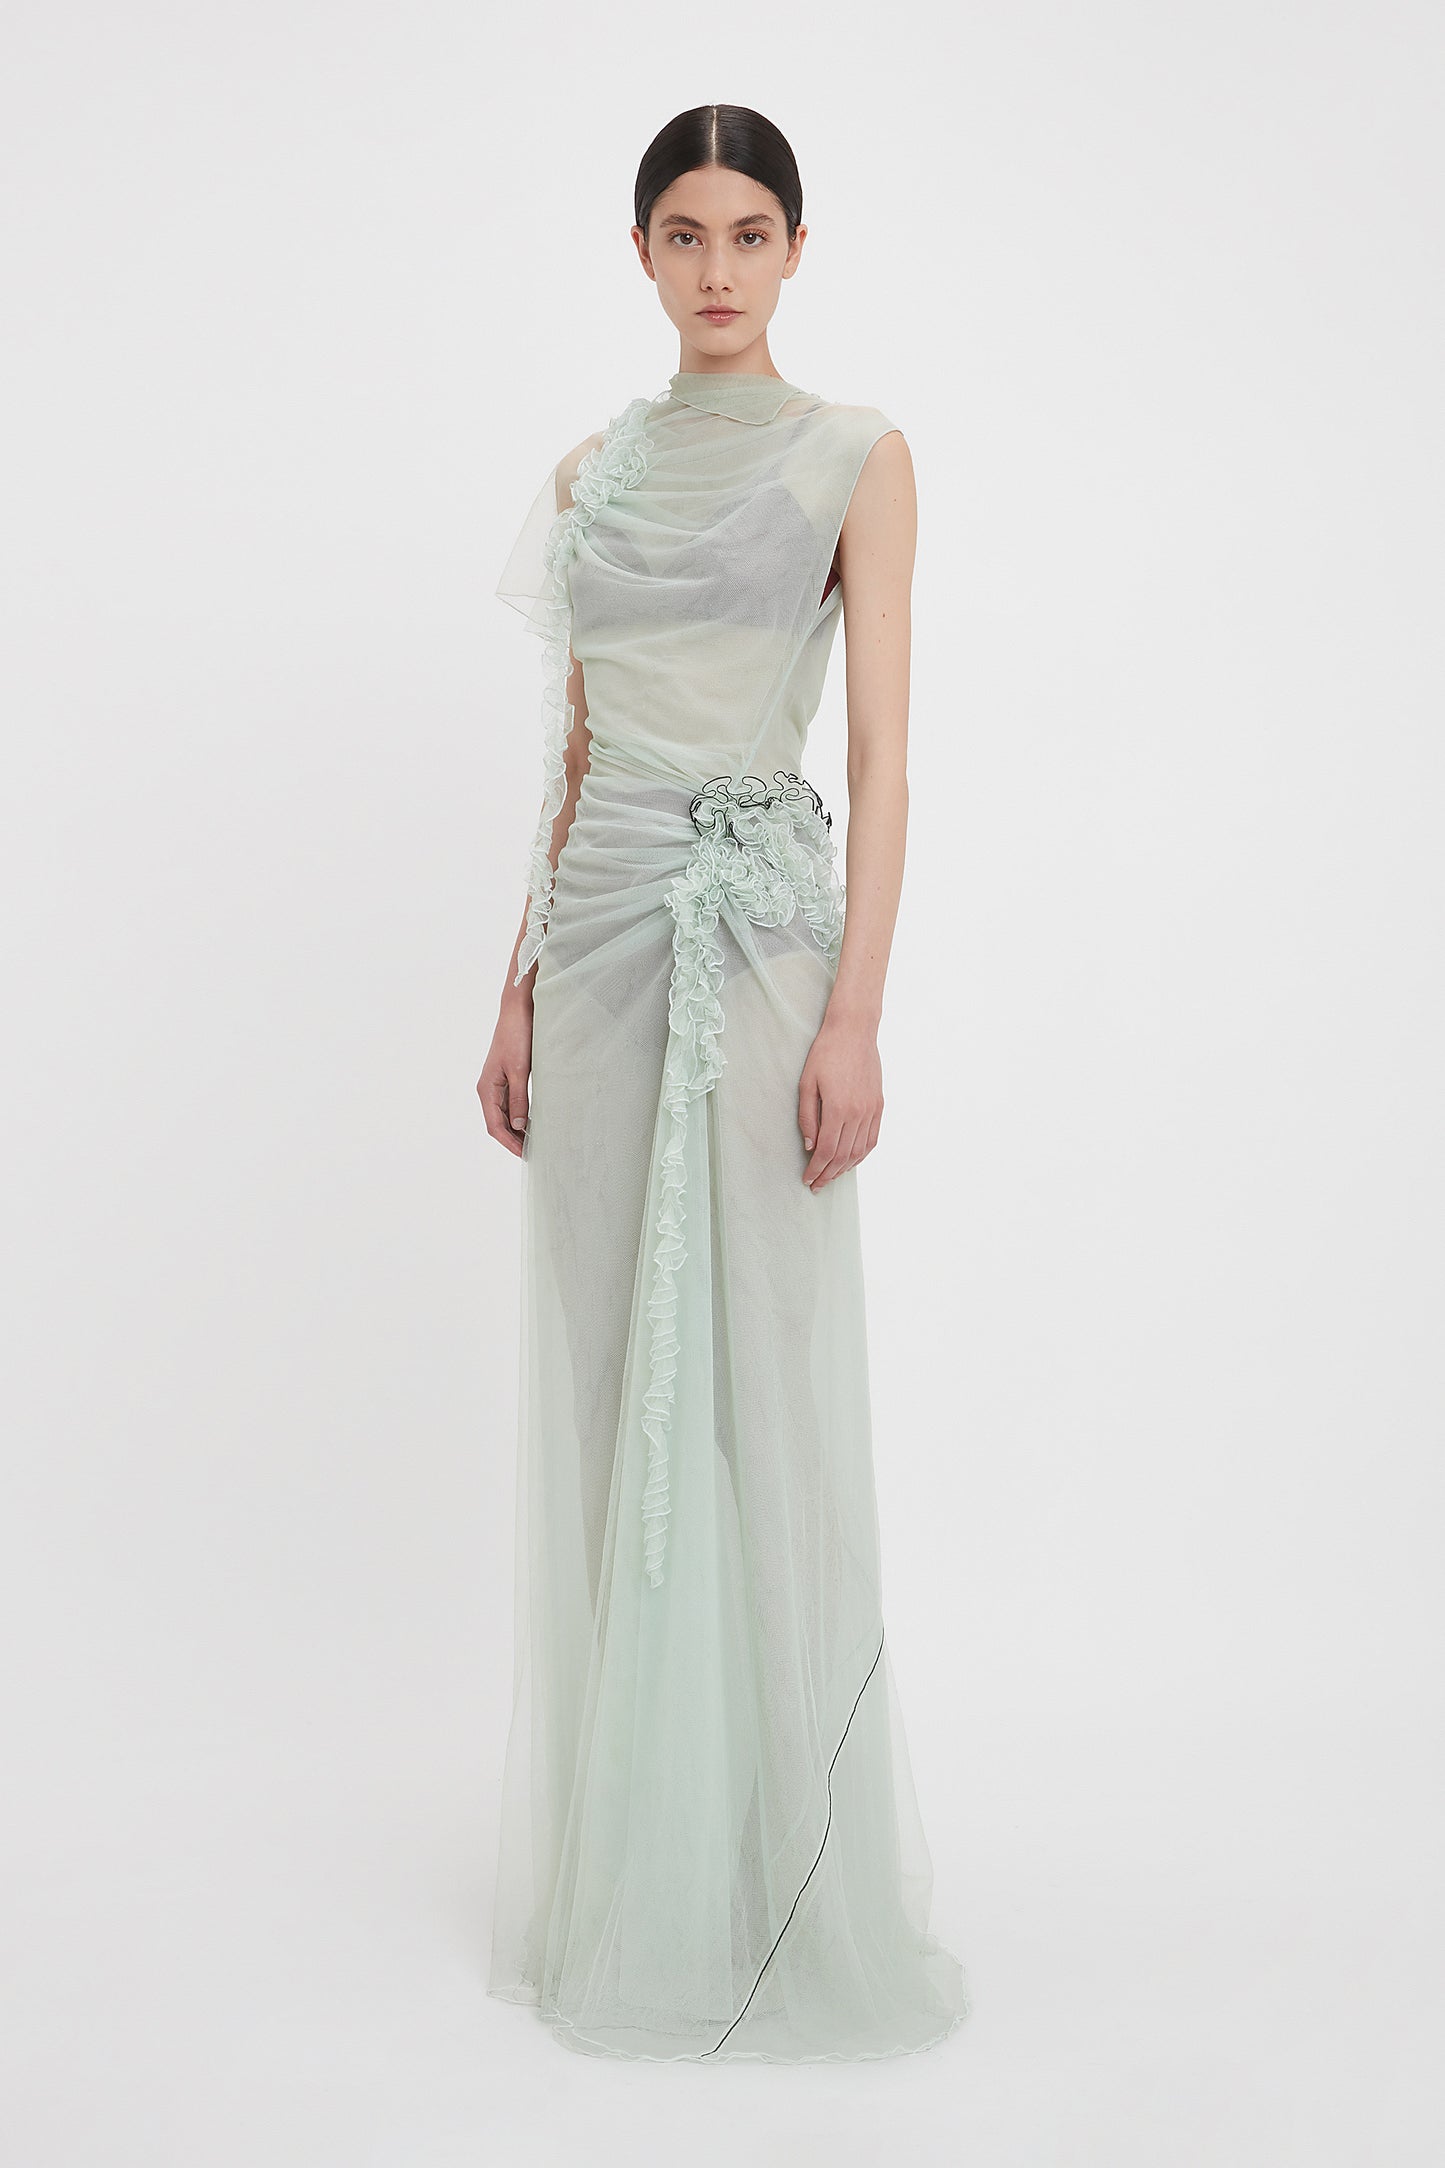 A model stands wearing the Victoria Beckham Gathered Tulle Detail Floor-Length Dress In Jade, crafted from delicate sea foam green tulle with a sheer, flowing design and floral ruche detailing on the side.